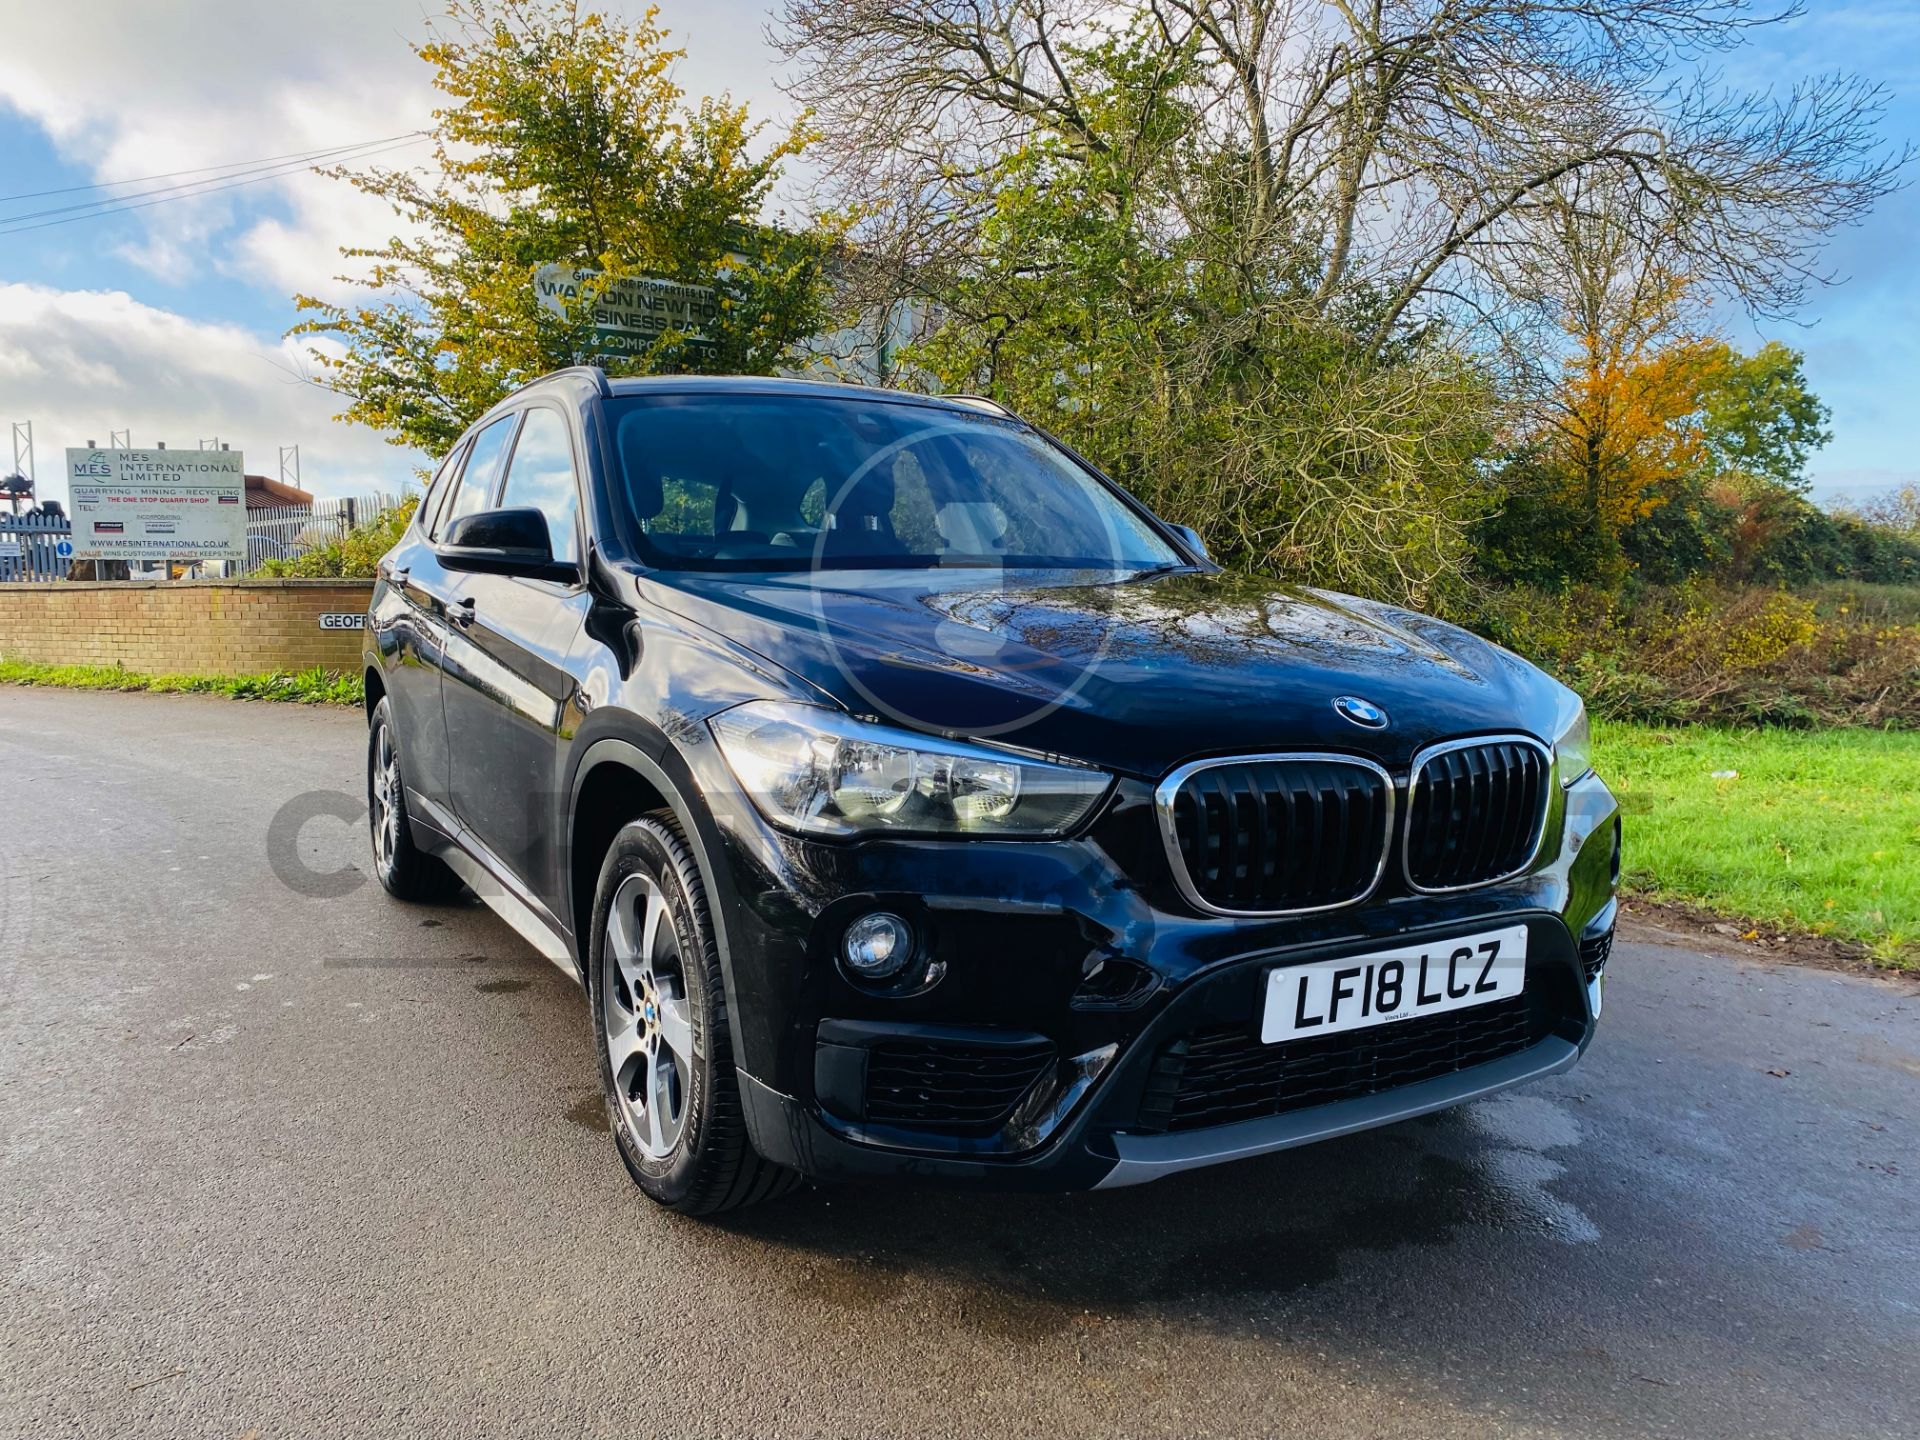 (ON SALE) BMW X1 sDRIVE 18d SE 2.0 DIESEL - 18 REG - 1 OWNER FROM NEW - SAT NAV - AIR CON - - Image 3 of 36